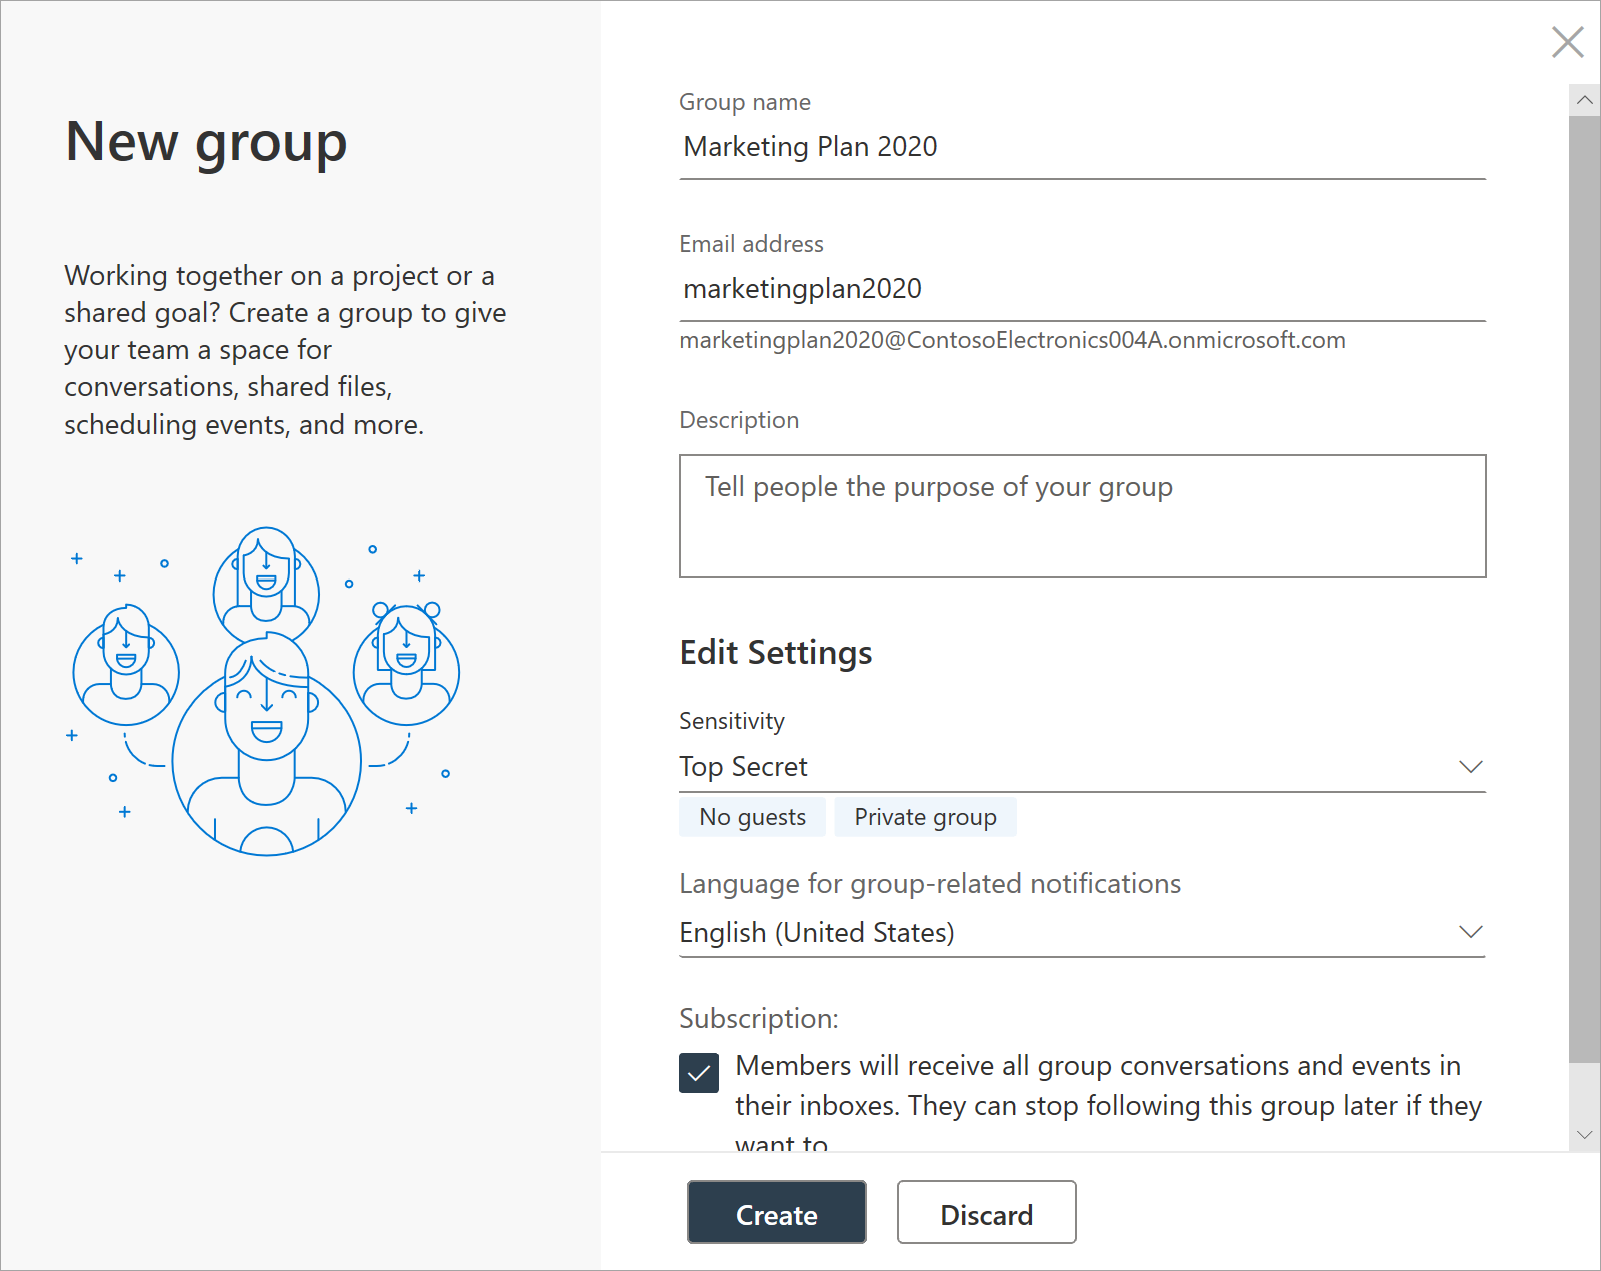 Creating a group and selecting an option under Sensitivity.